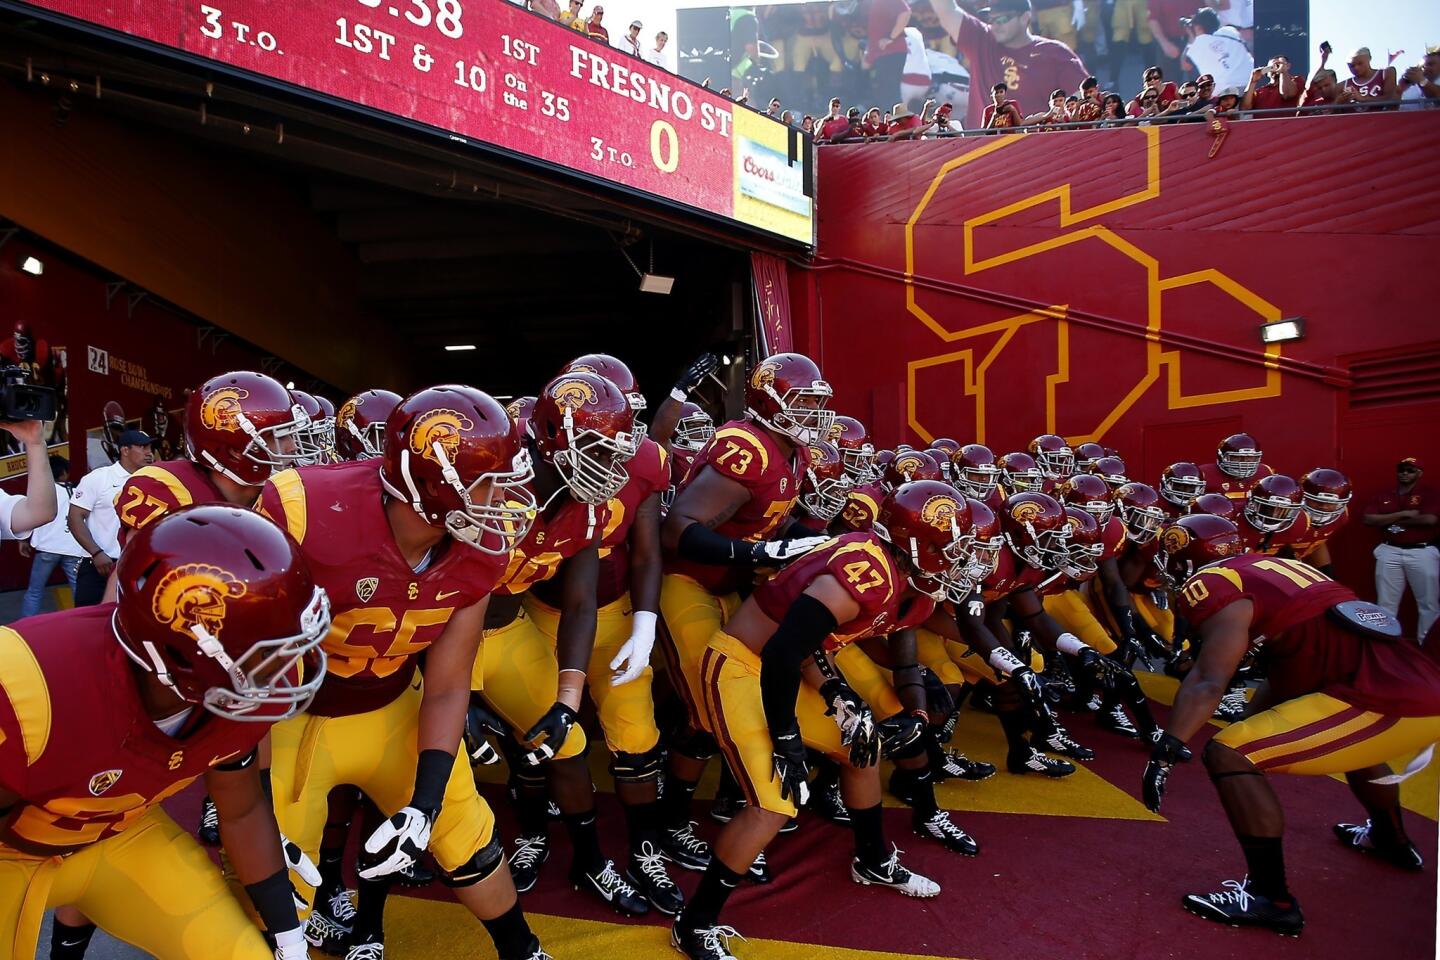 USC players get ready to take the field at the Coliseum before their season-opening game against Fresno State.